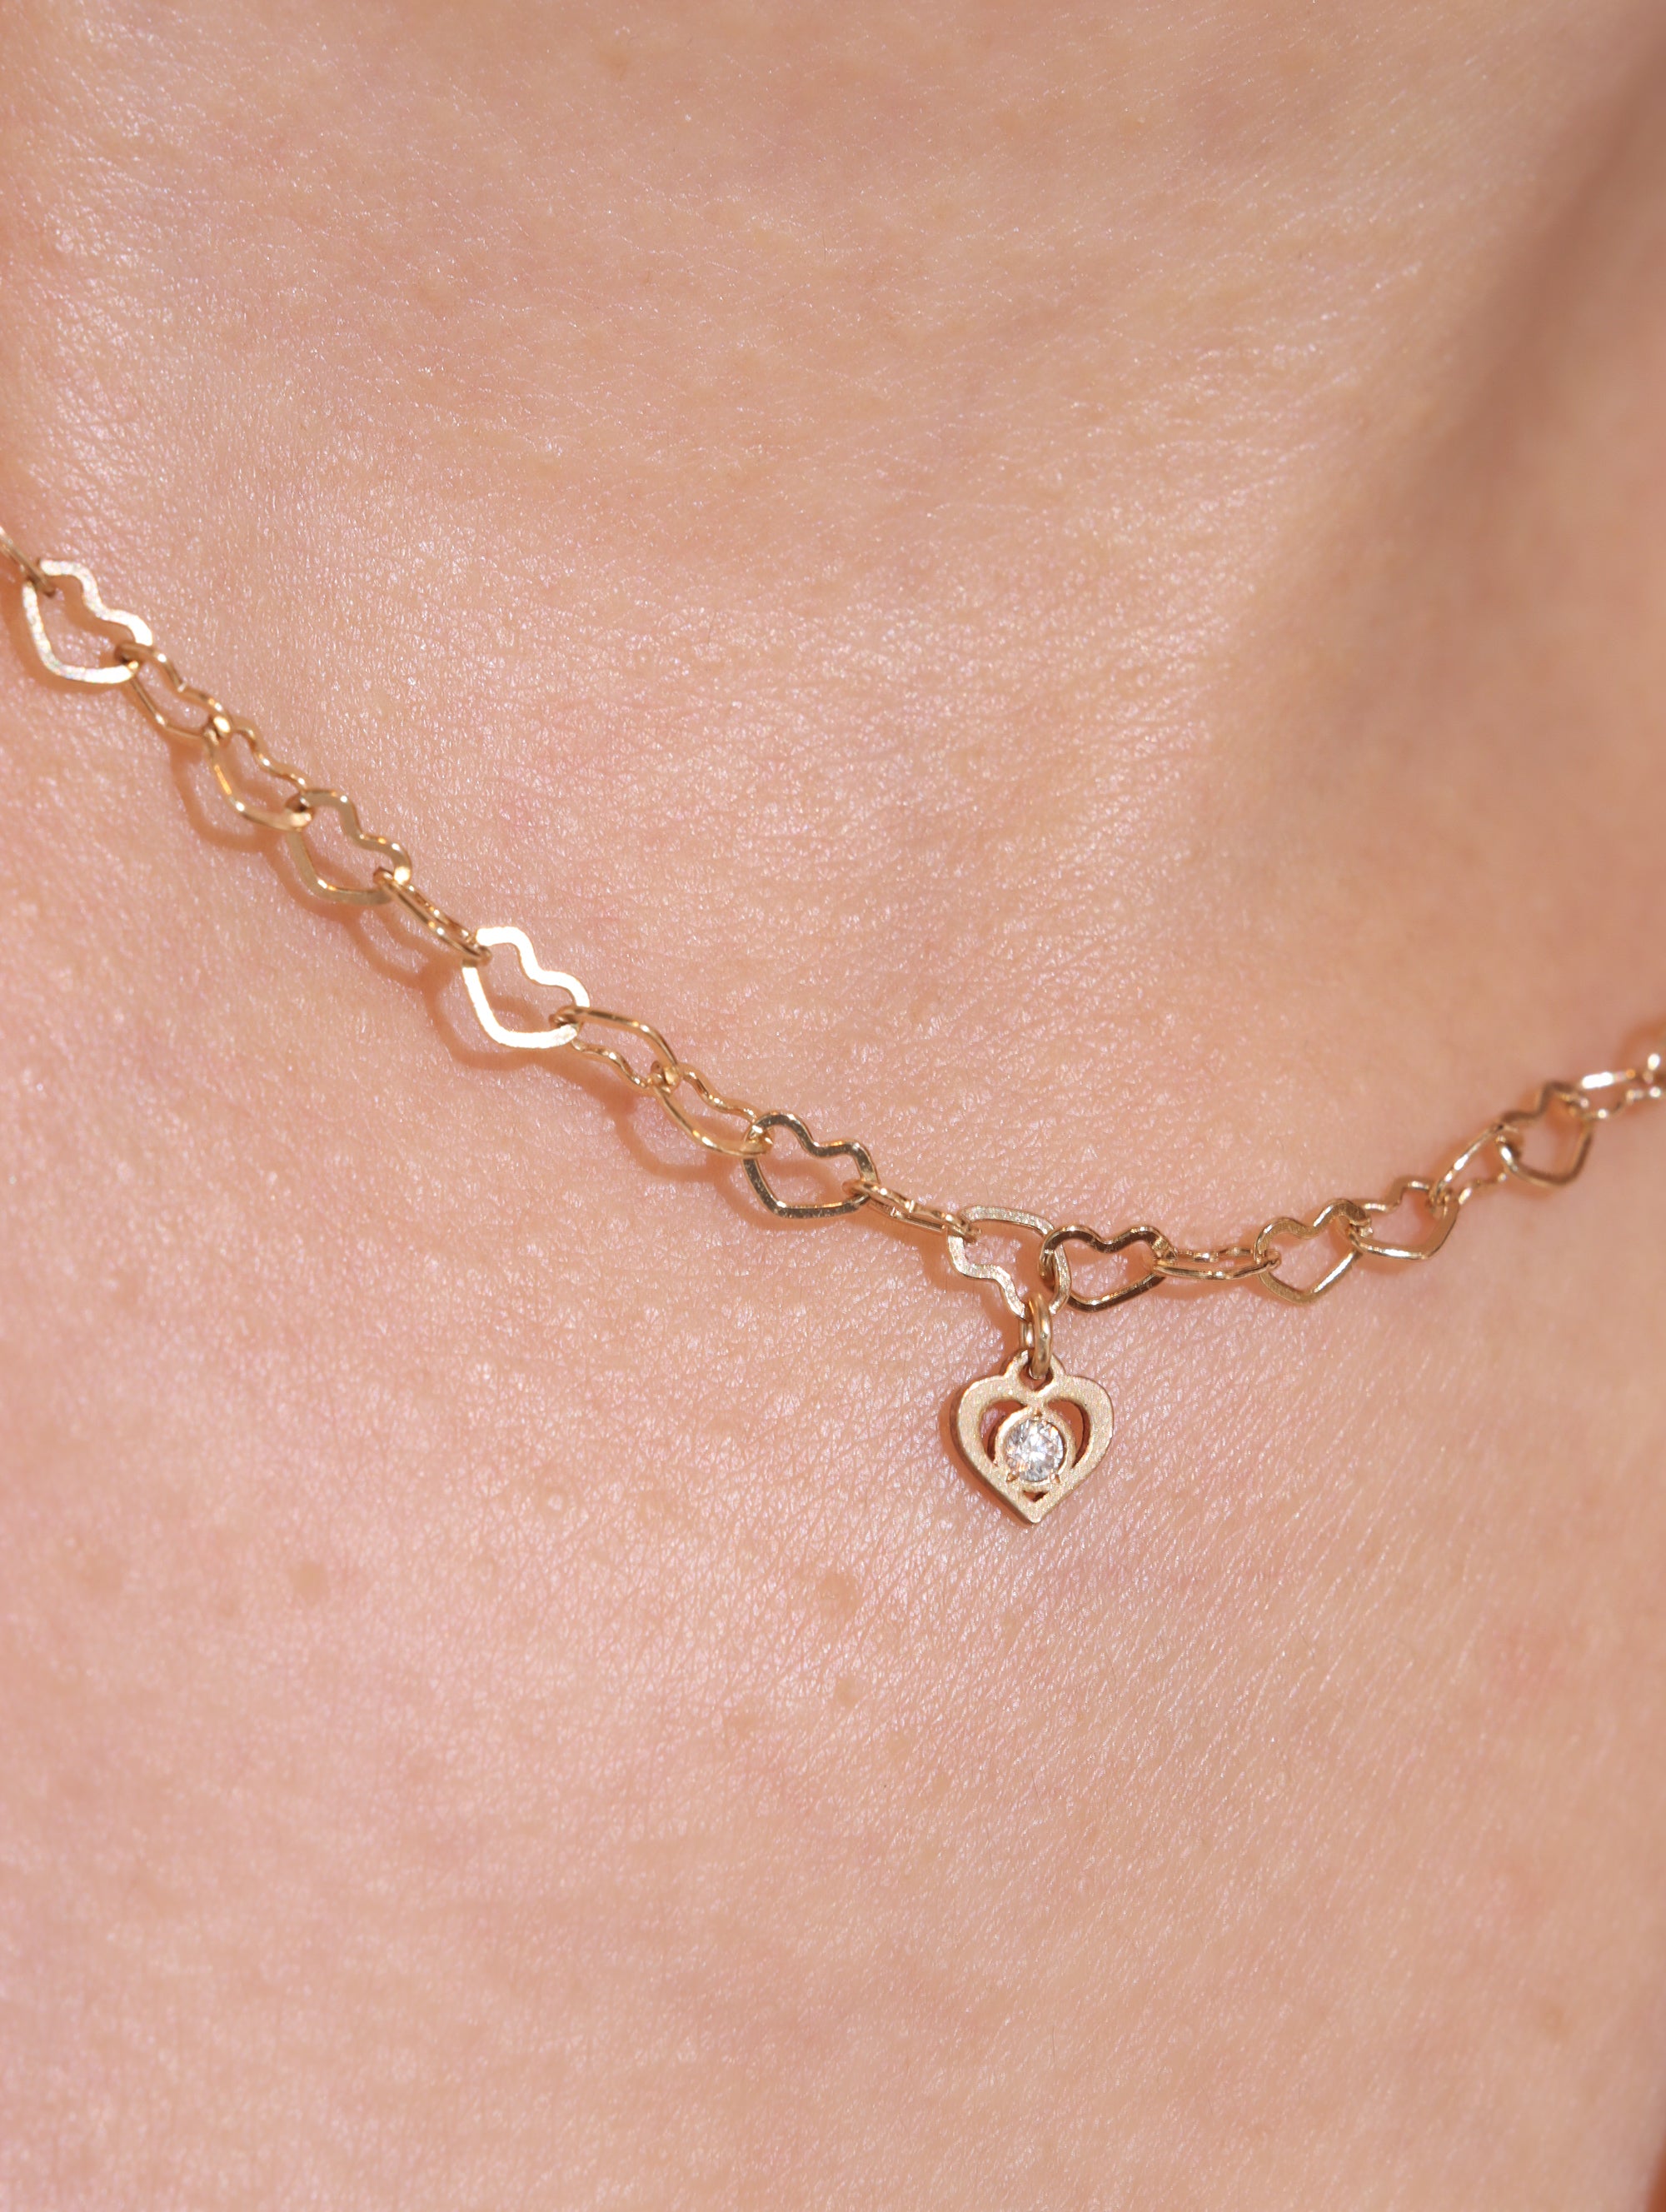 14k Gold Handmade Injection Small Love Necklace / Clavicle Chain